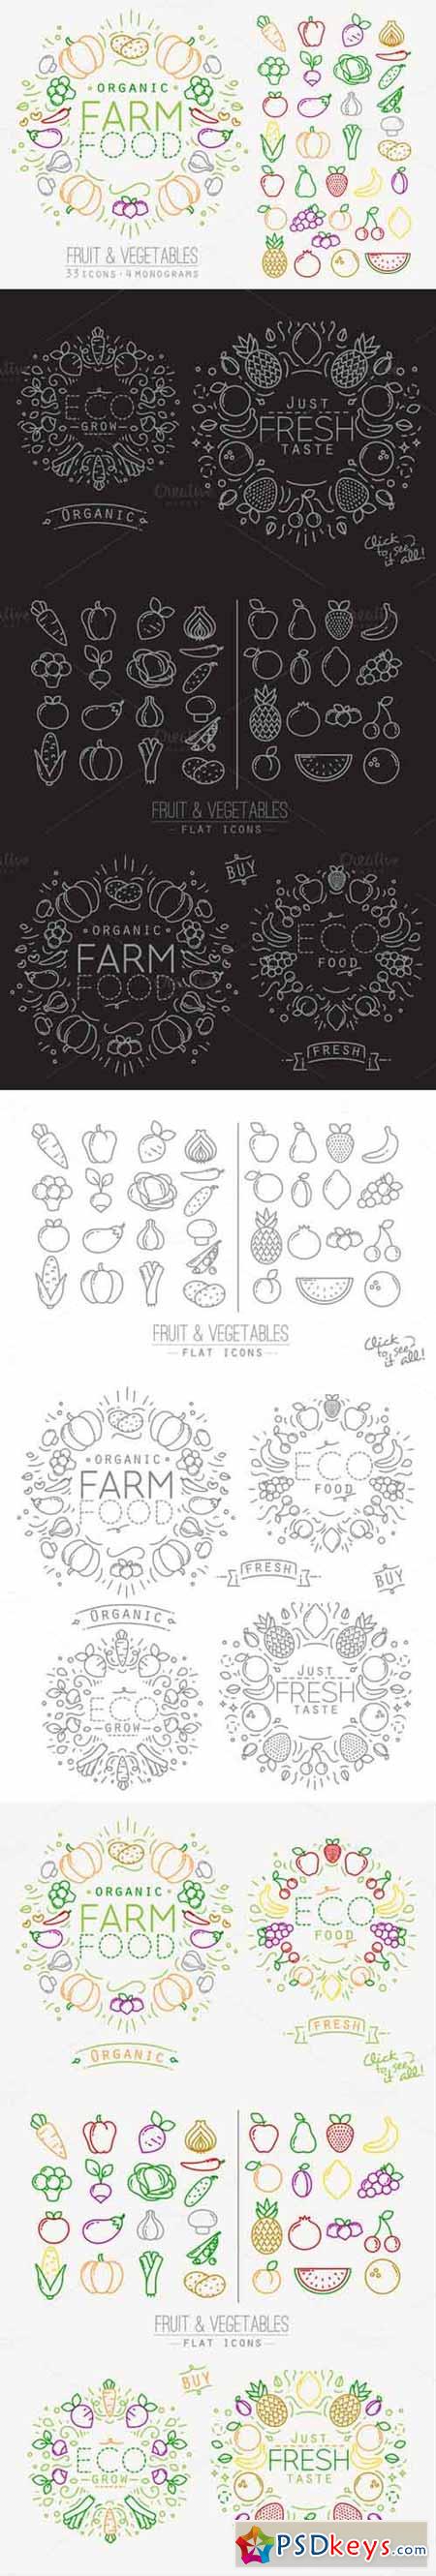 Flat Fruits & Vegetables Icons 378480